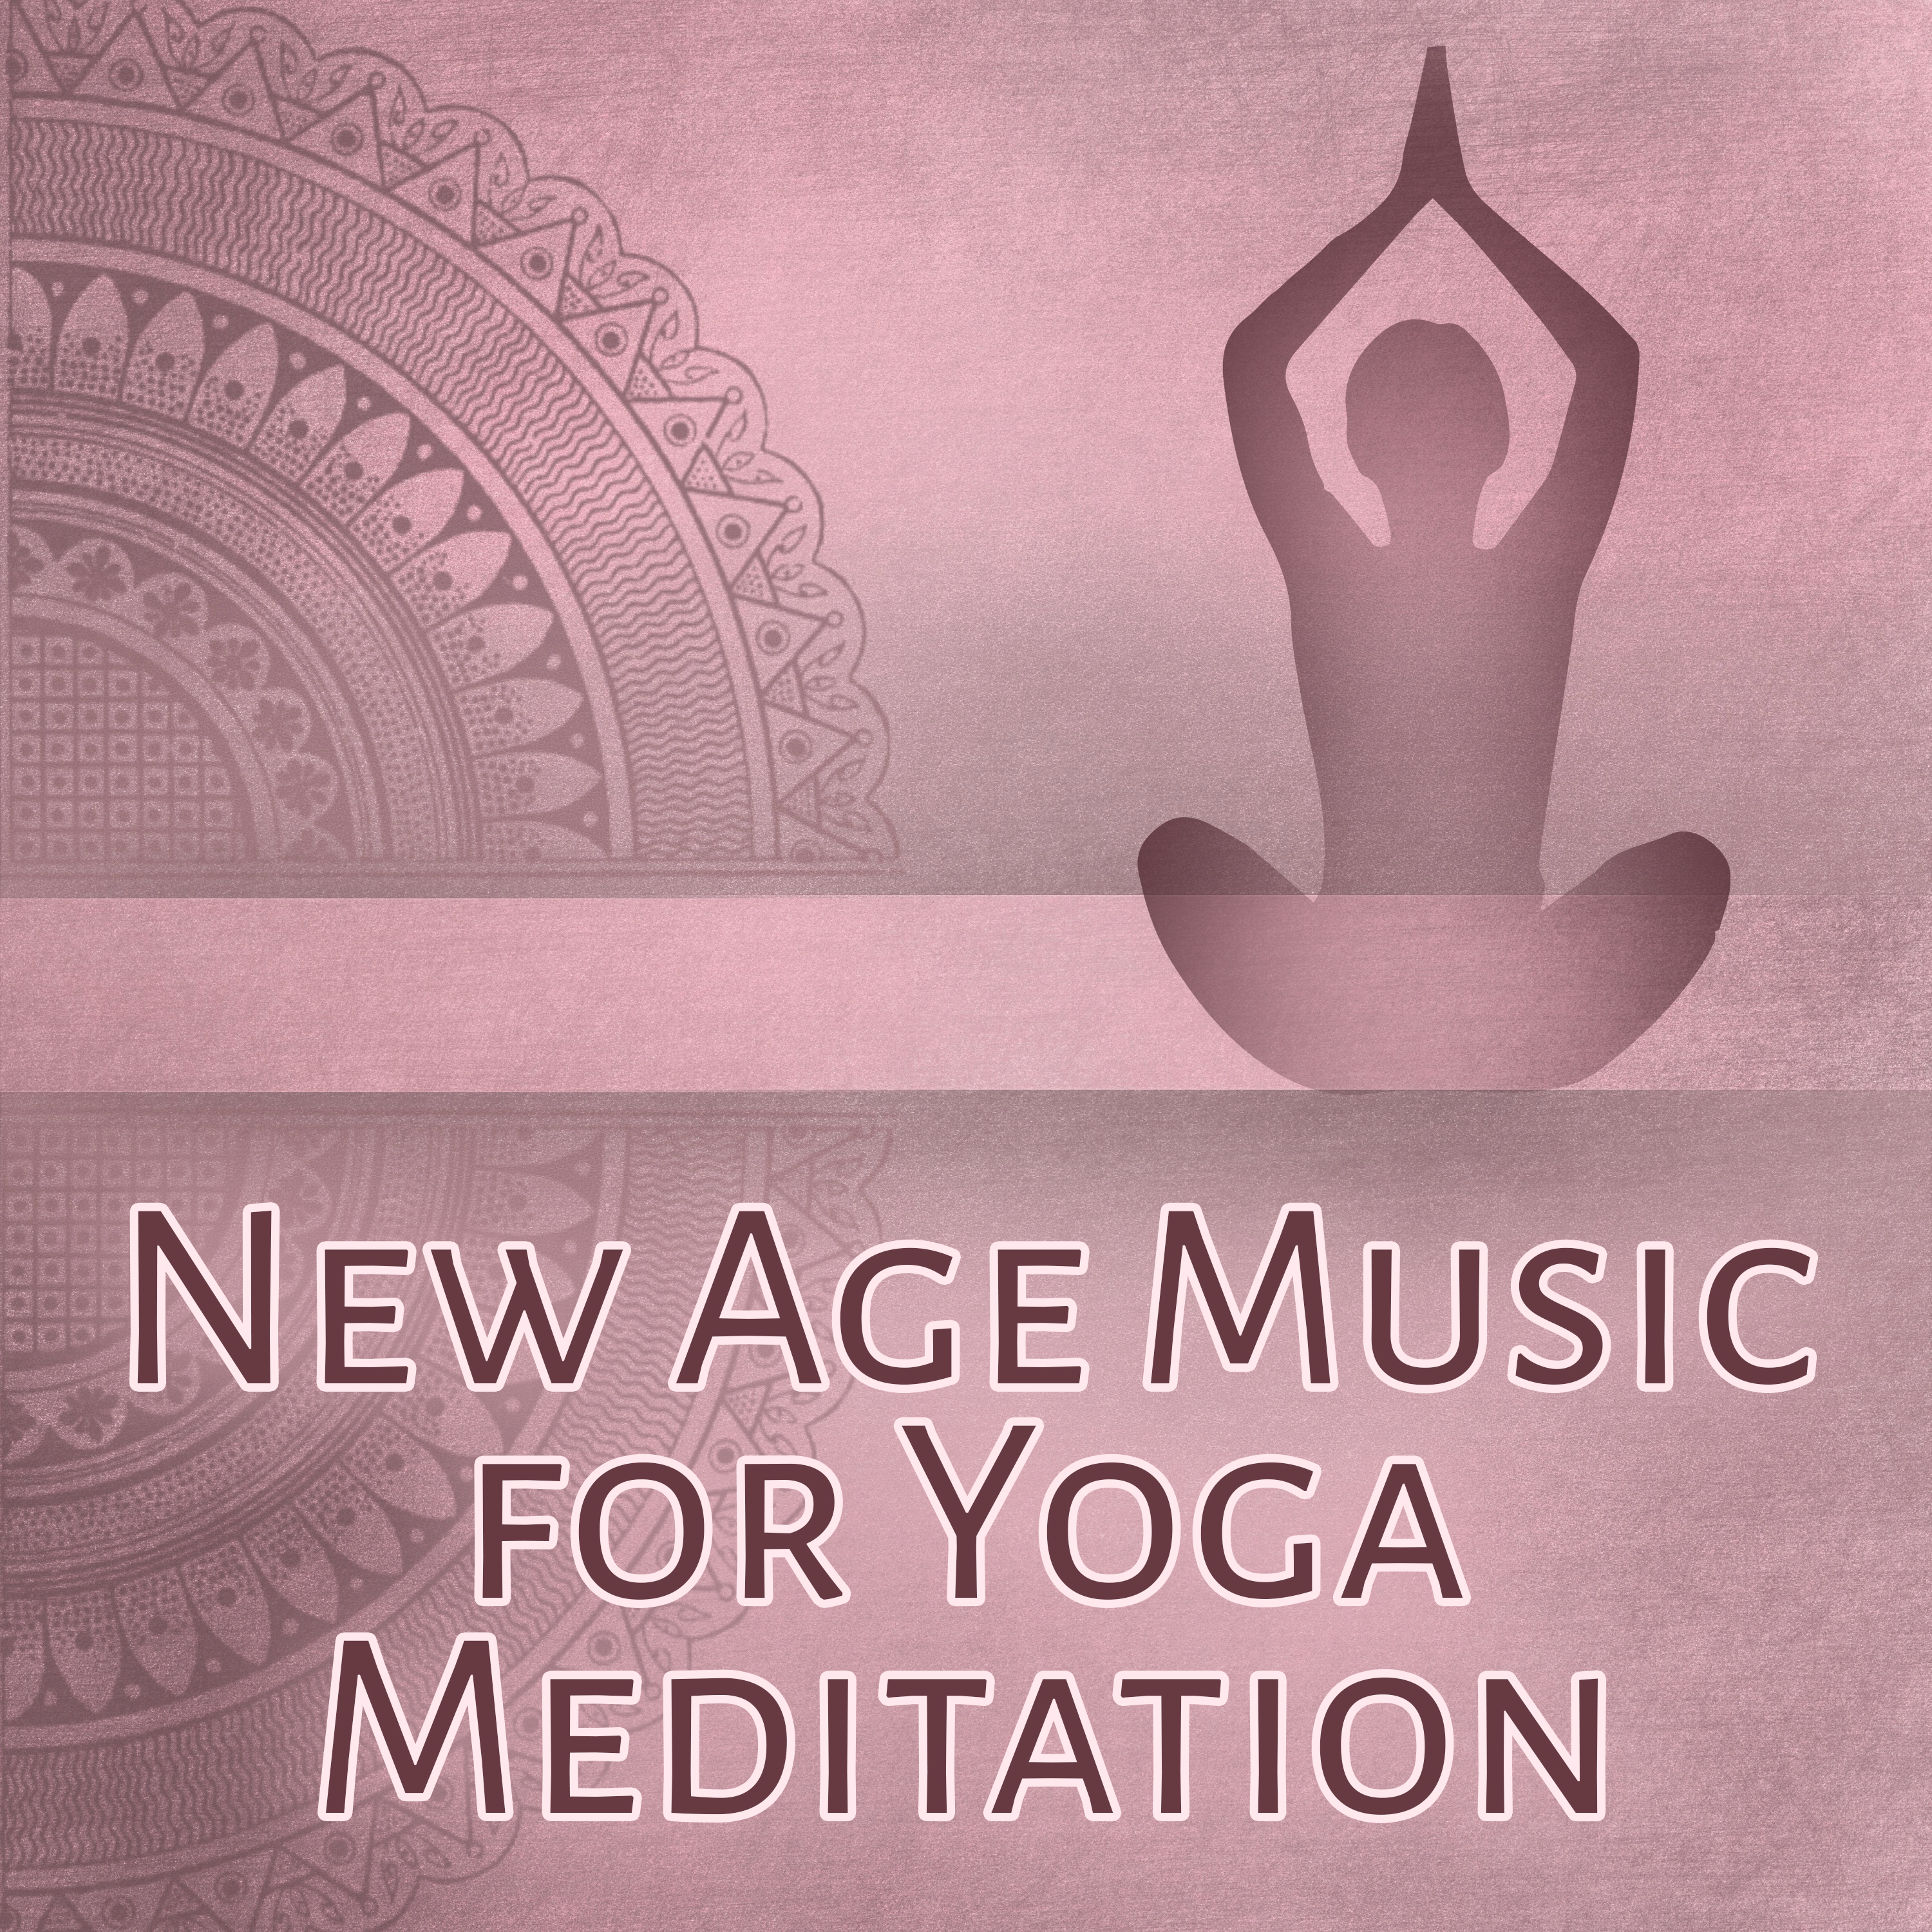 New Age Music for Yoga Meditation – Music for Meditation, Deep Relaxation Sounds of Nature for Yoga, Pilates, Rest